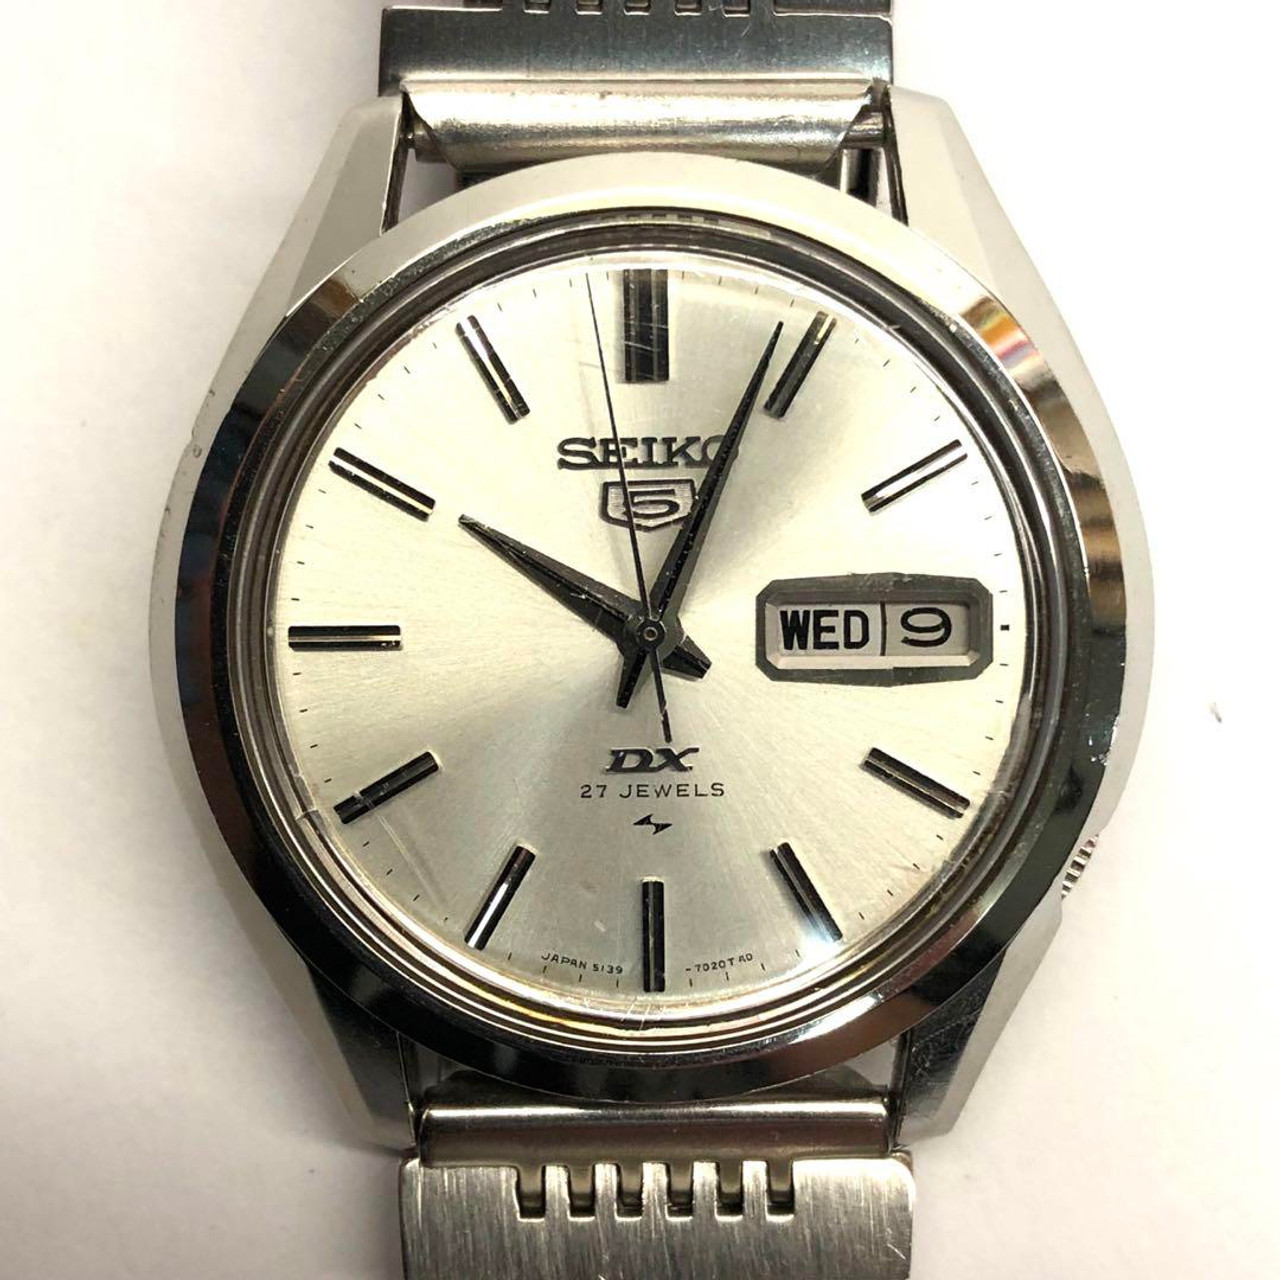 Seiko Seiko 5 5139-7020 Vintage 27 Jewels Stainless Steel Automatic Mens  Watch - Japan Pre-owned Vintage